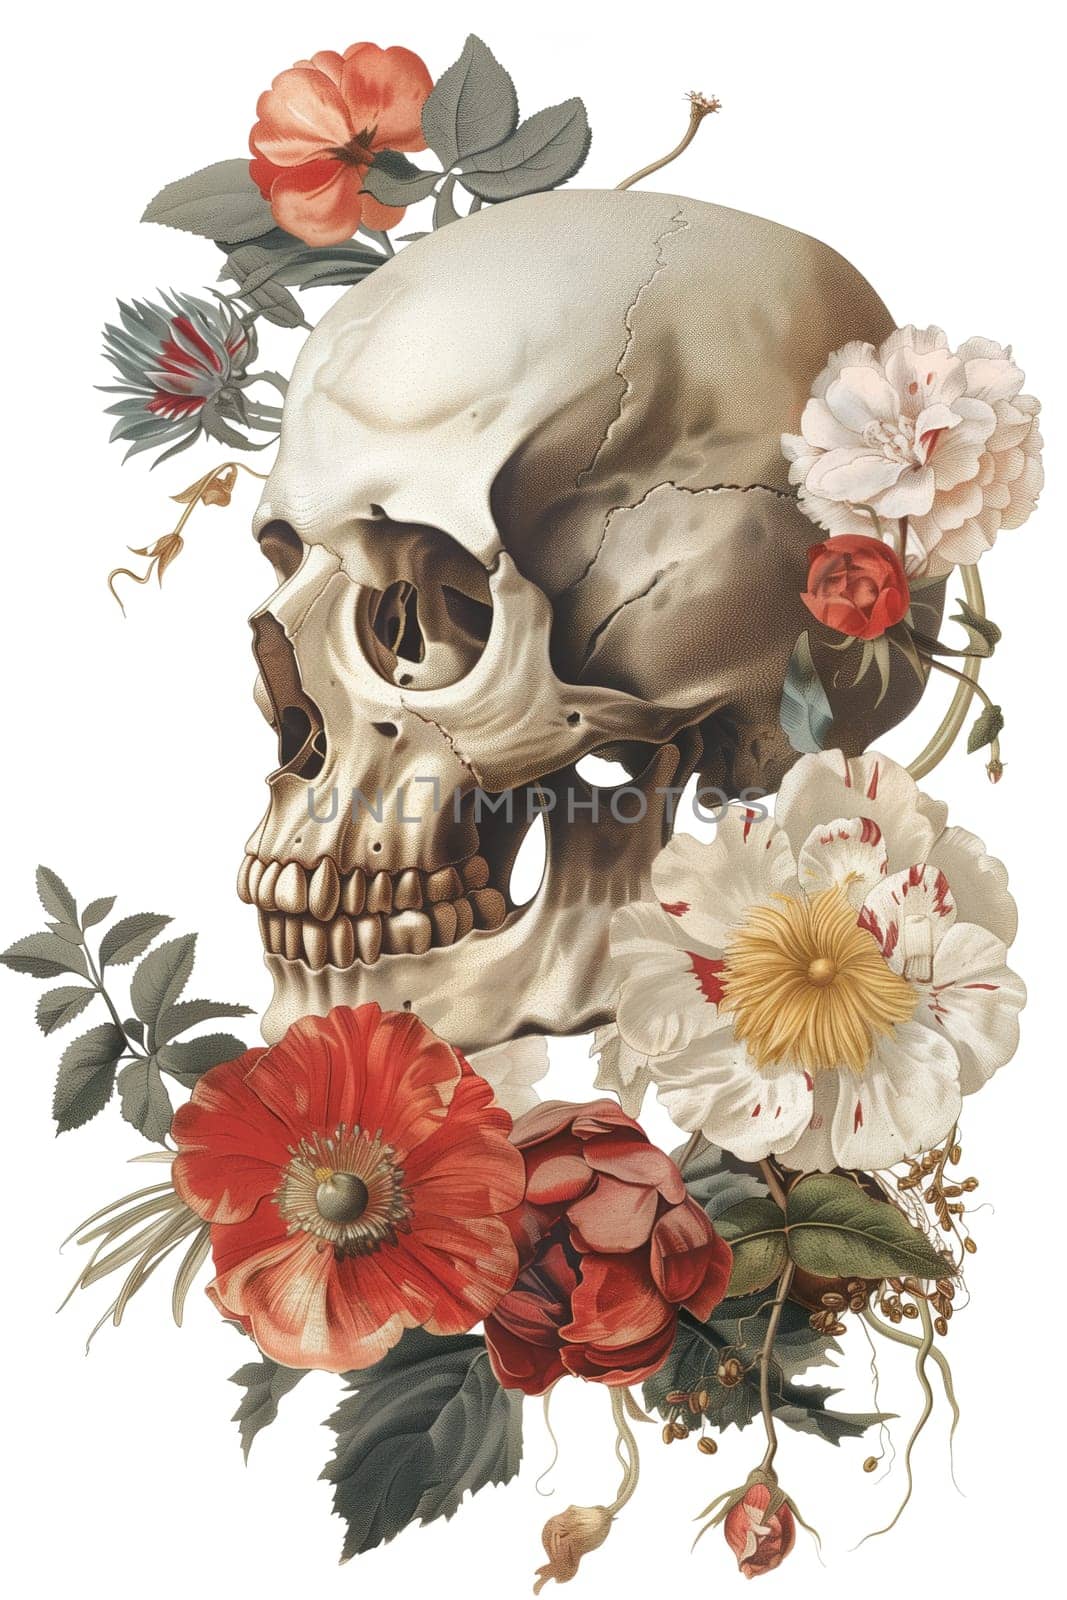 Vintage Illustration of skull with flowers side view by Dustick